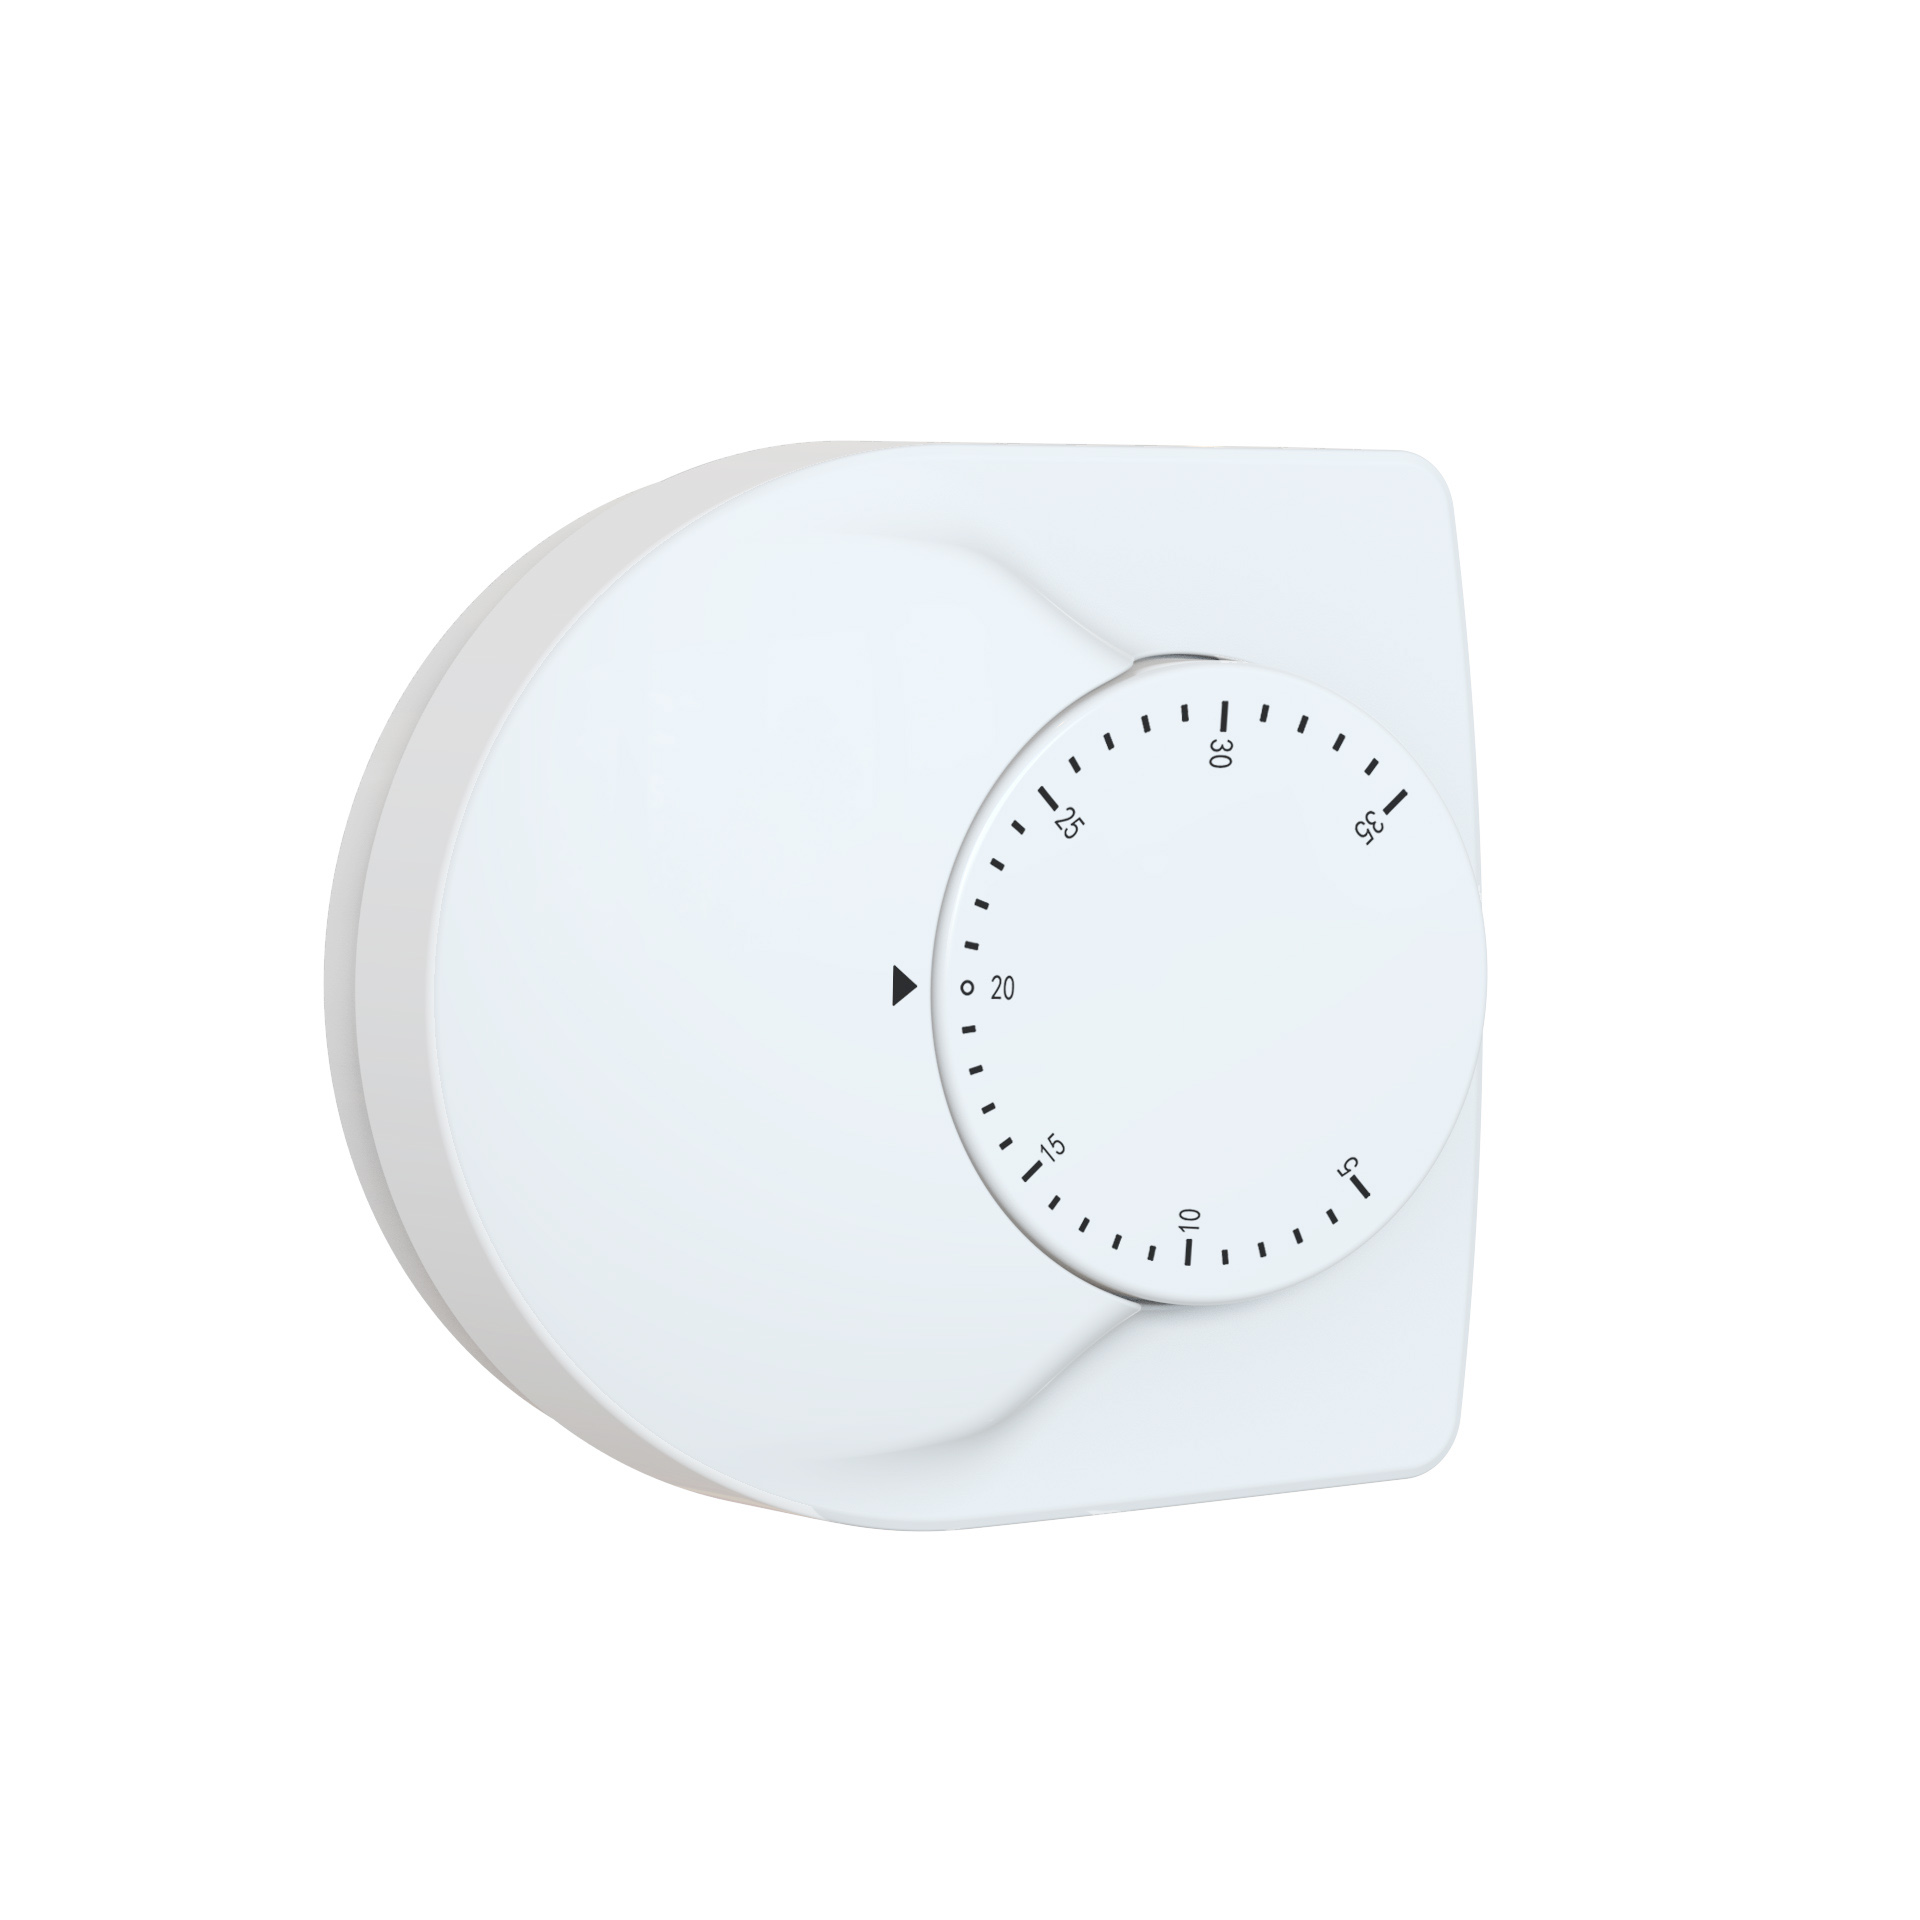 Replace Mechnical Thermostat for Room Heating Controller